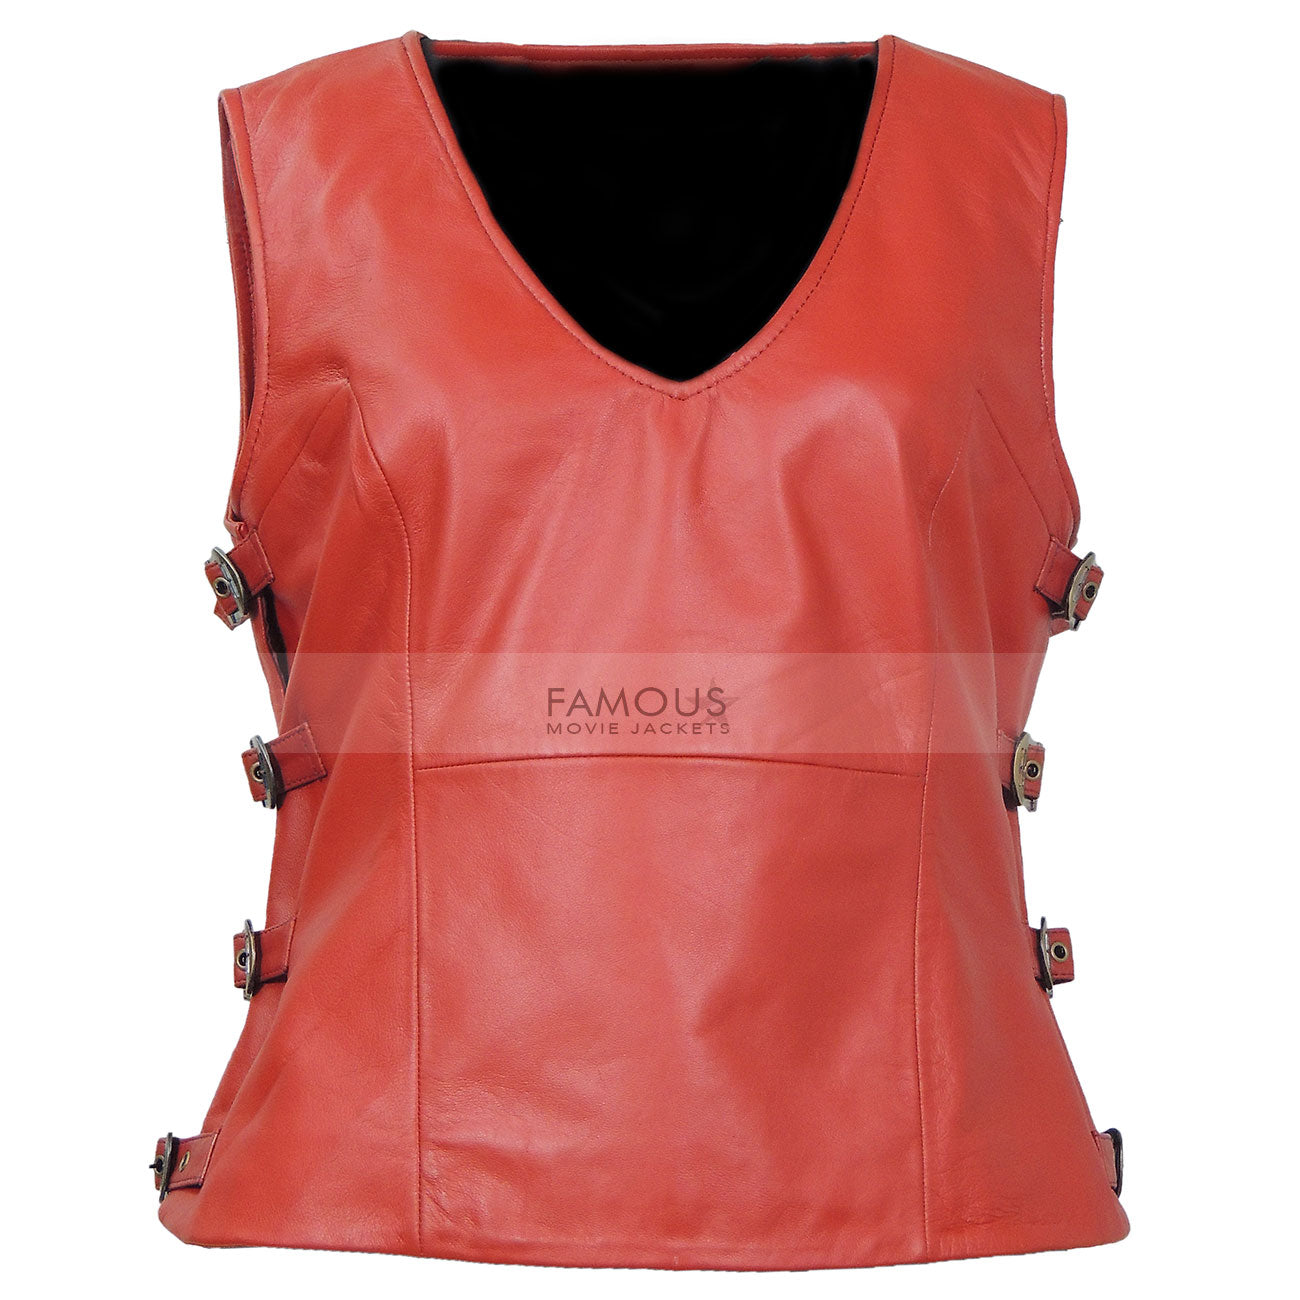 Firefly TV Series Zoe Washburne (Gina) Brown Leather Vest